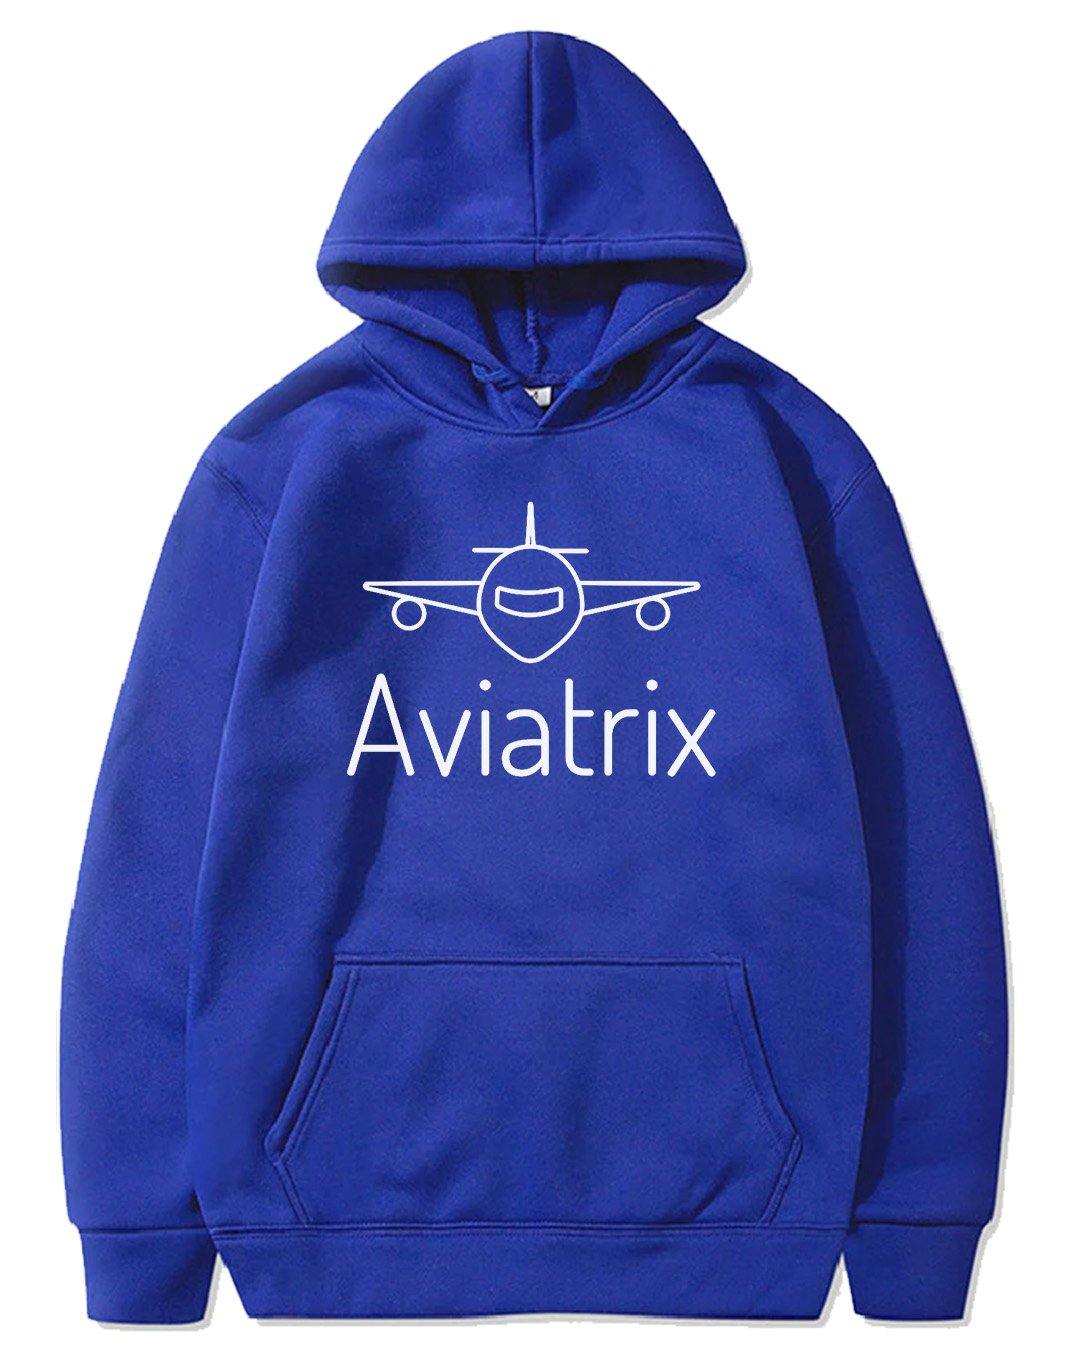 AVIATRIX AND AIRPLANES PULLOVER THE AV8R